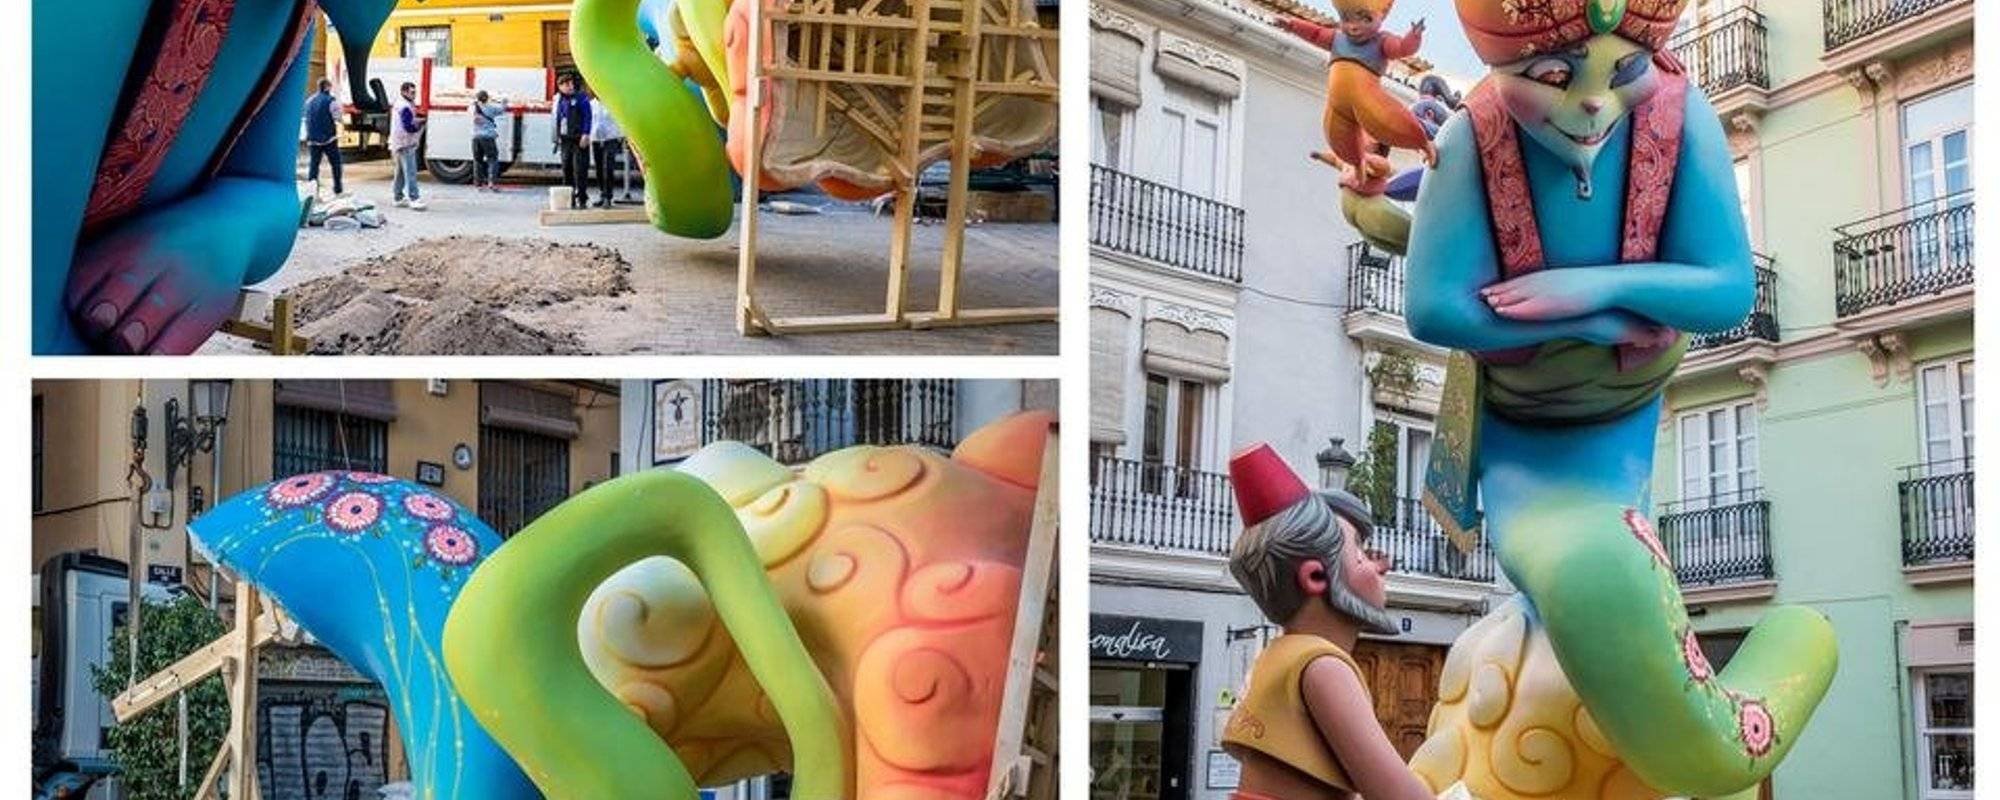 The Story of the Fallas Sculptures in Valencia, Spain